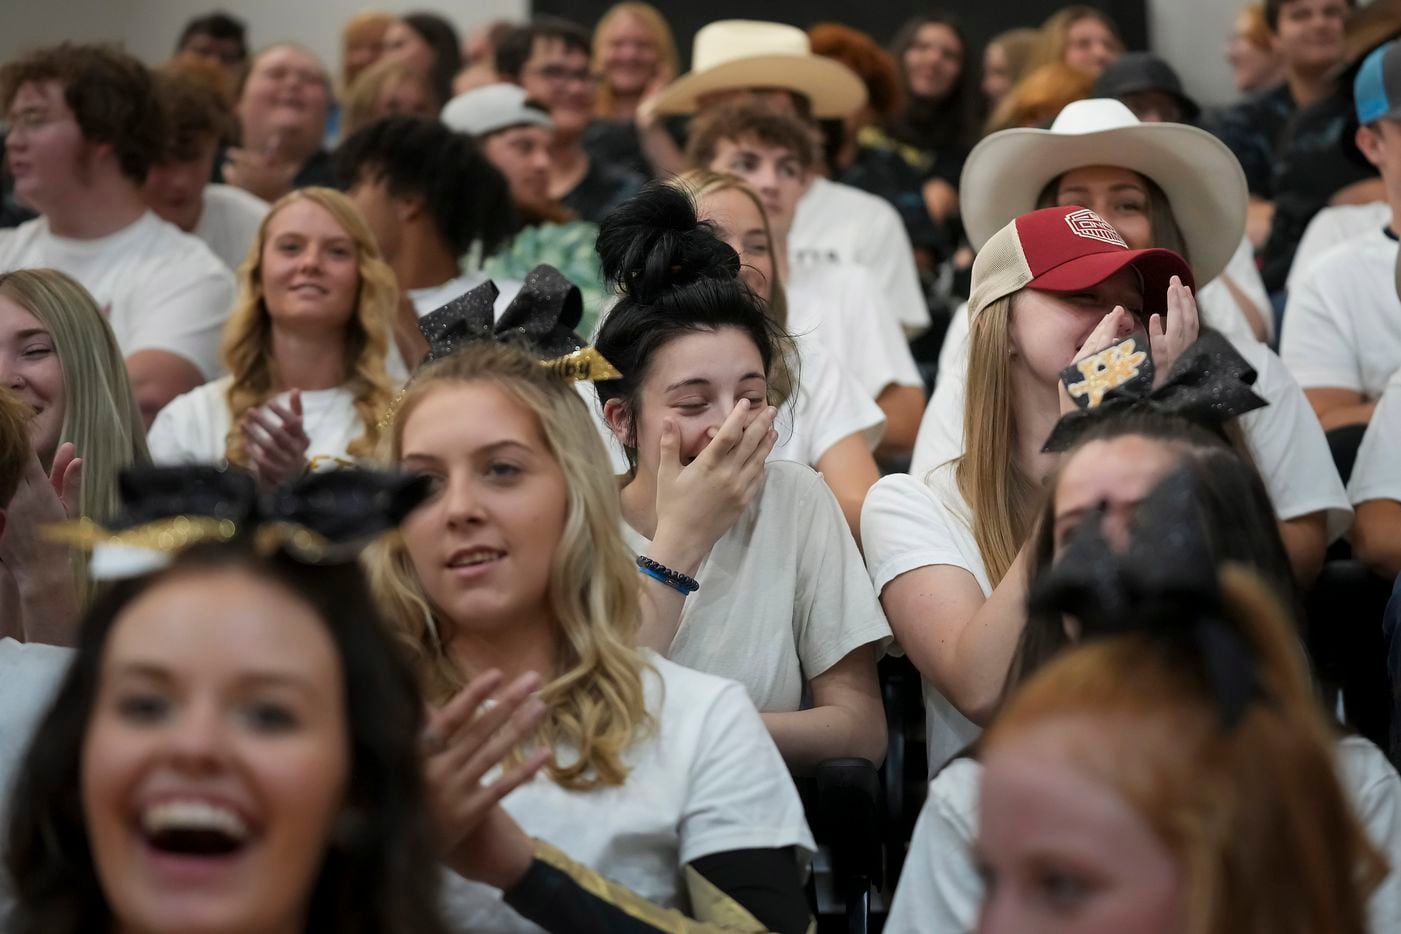 Students react after Troy Aikman announced that Blake Shelton will headline a music festival in their town.